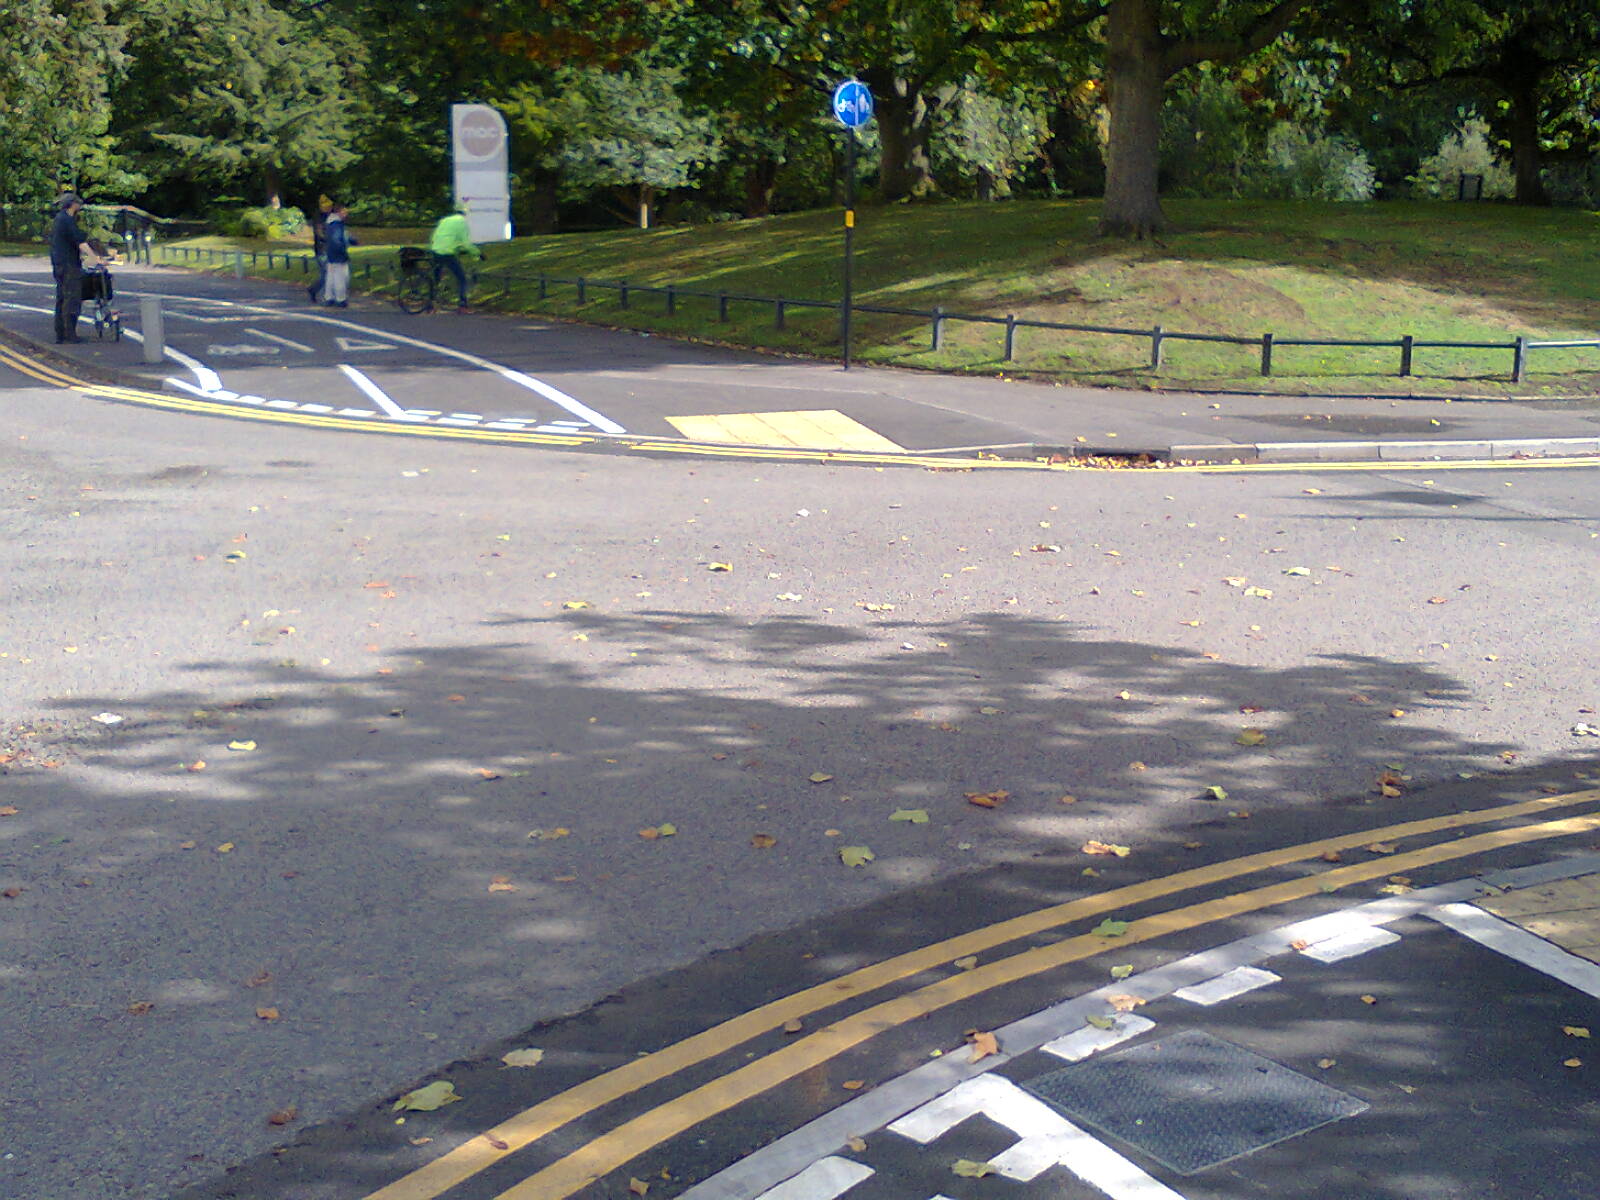 The entrance to Cannon Hill car park, with give-way markings for the cycle track.